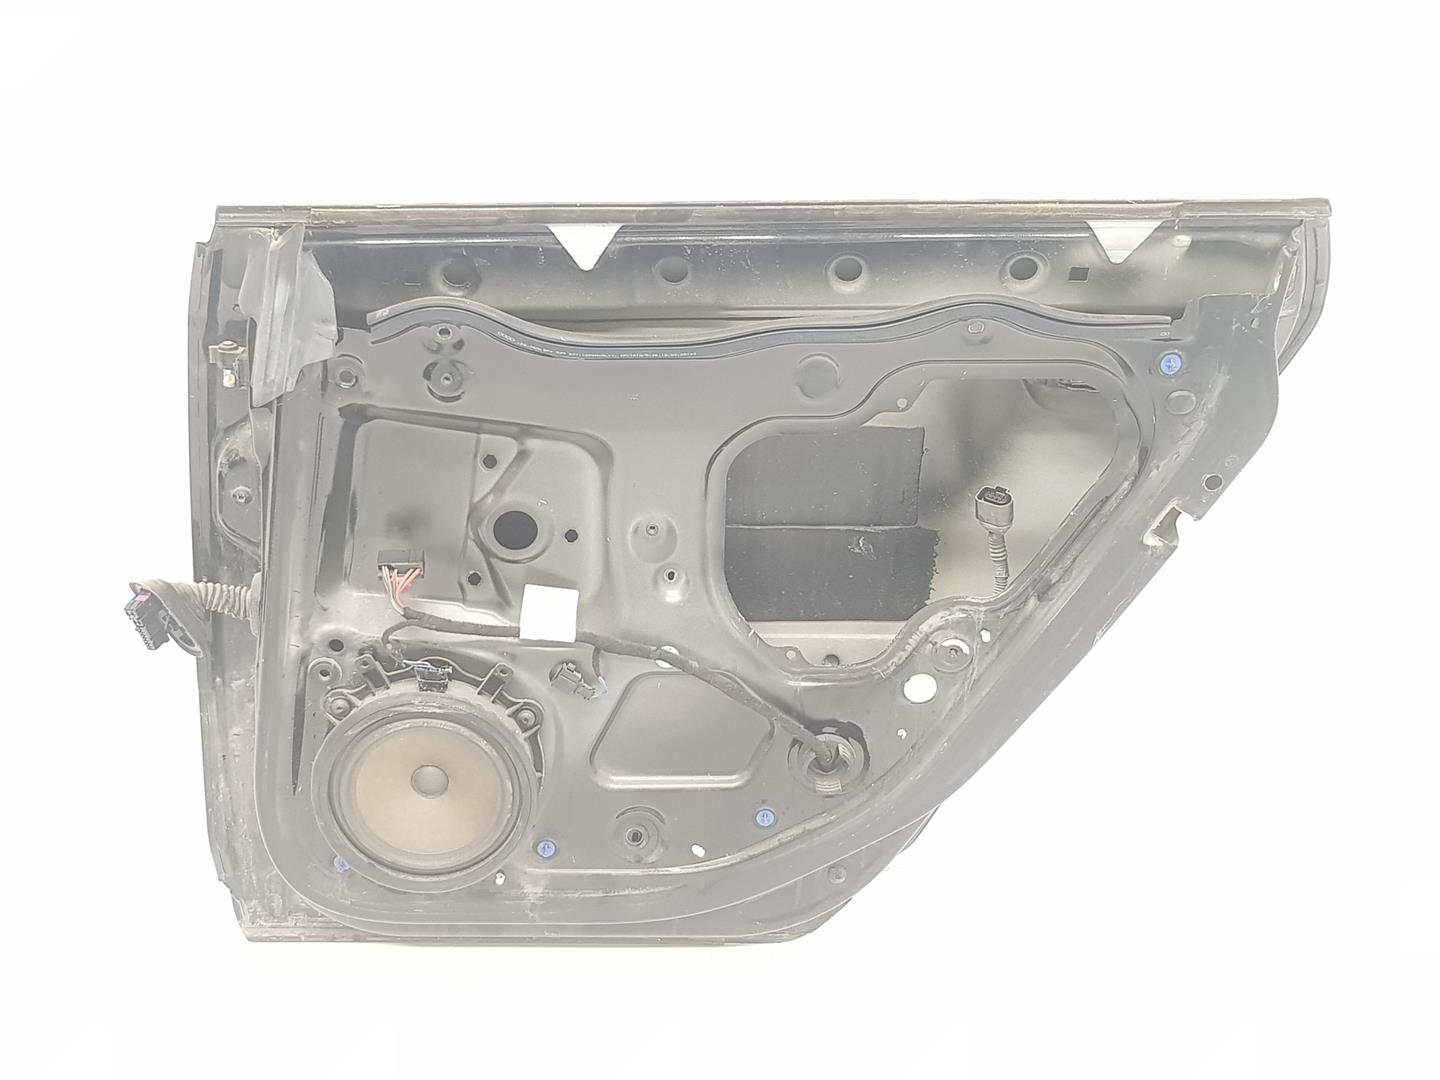 BMW A2 8Z (1999-2005) Rear Right Door 8P4833052A, 8P4833052A, COLORNEGROY9B 19724566